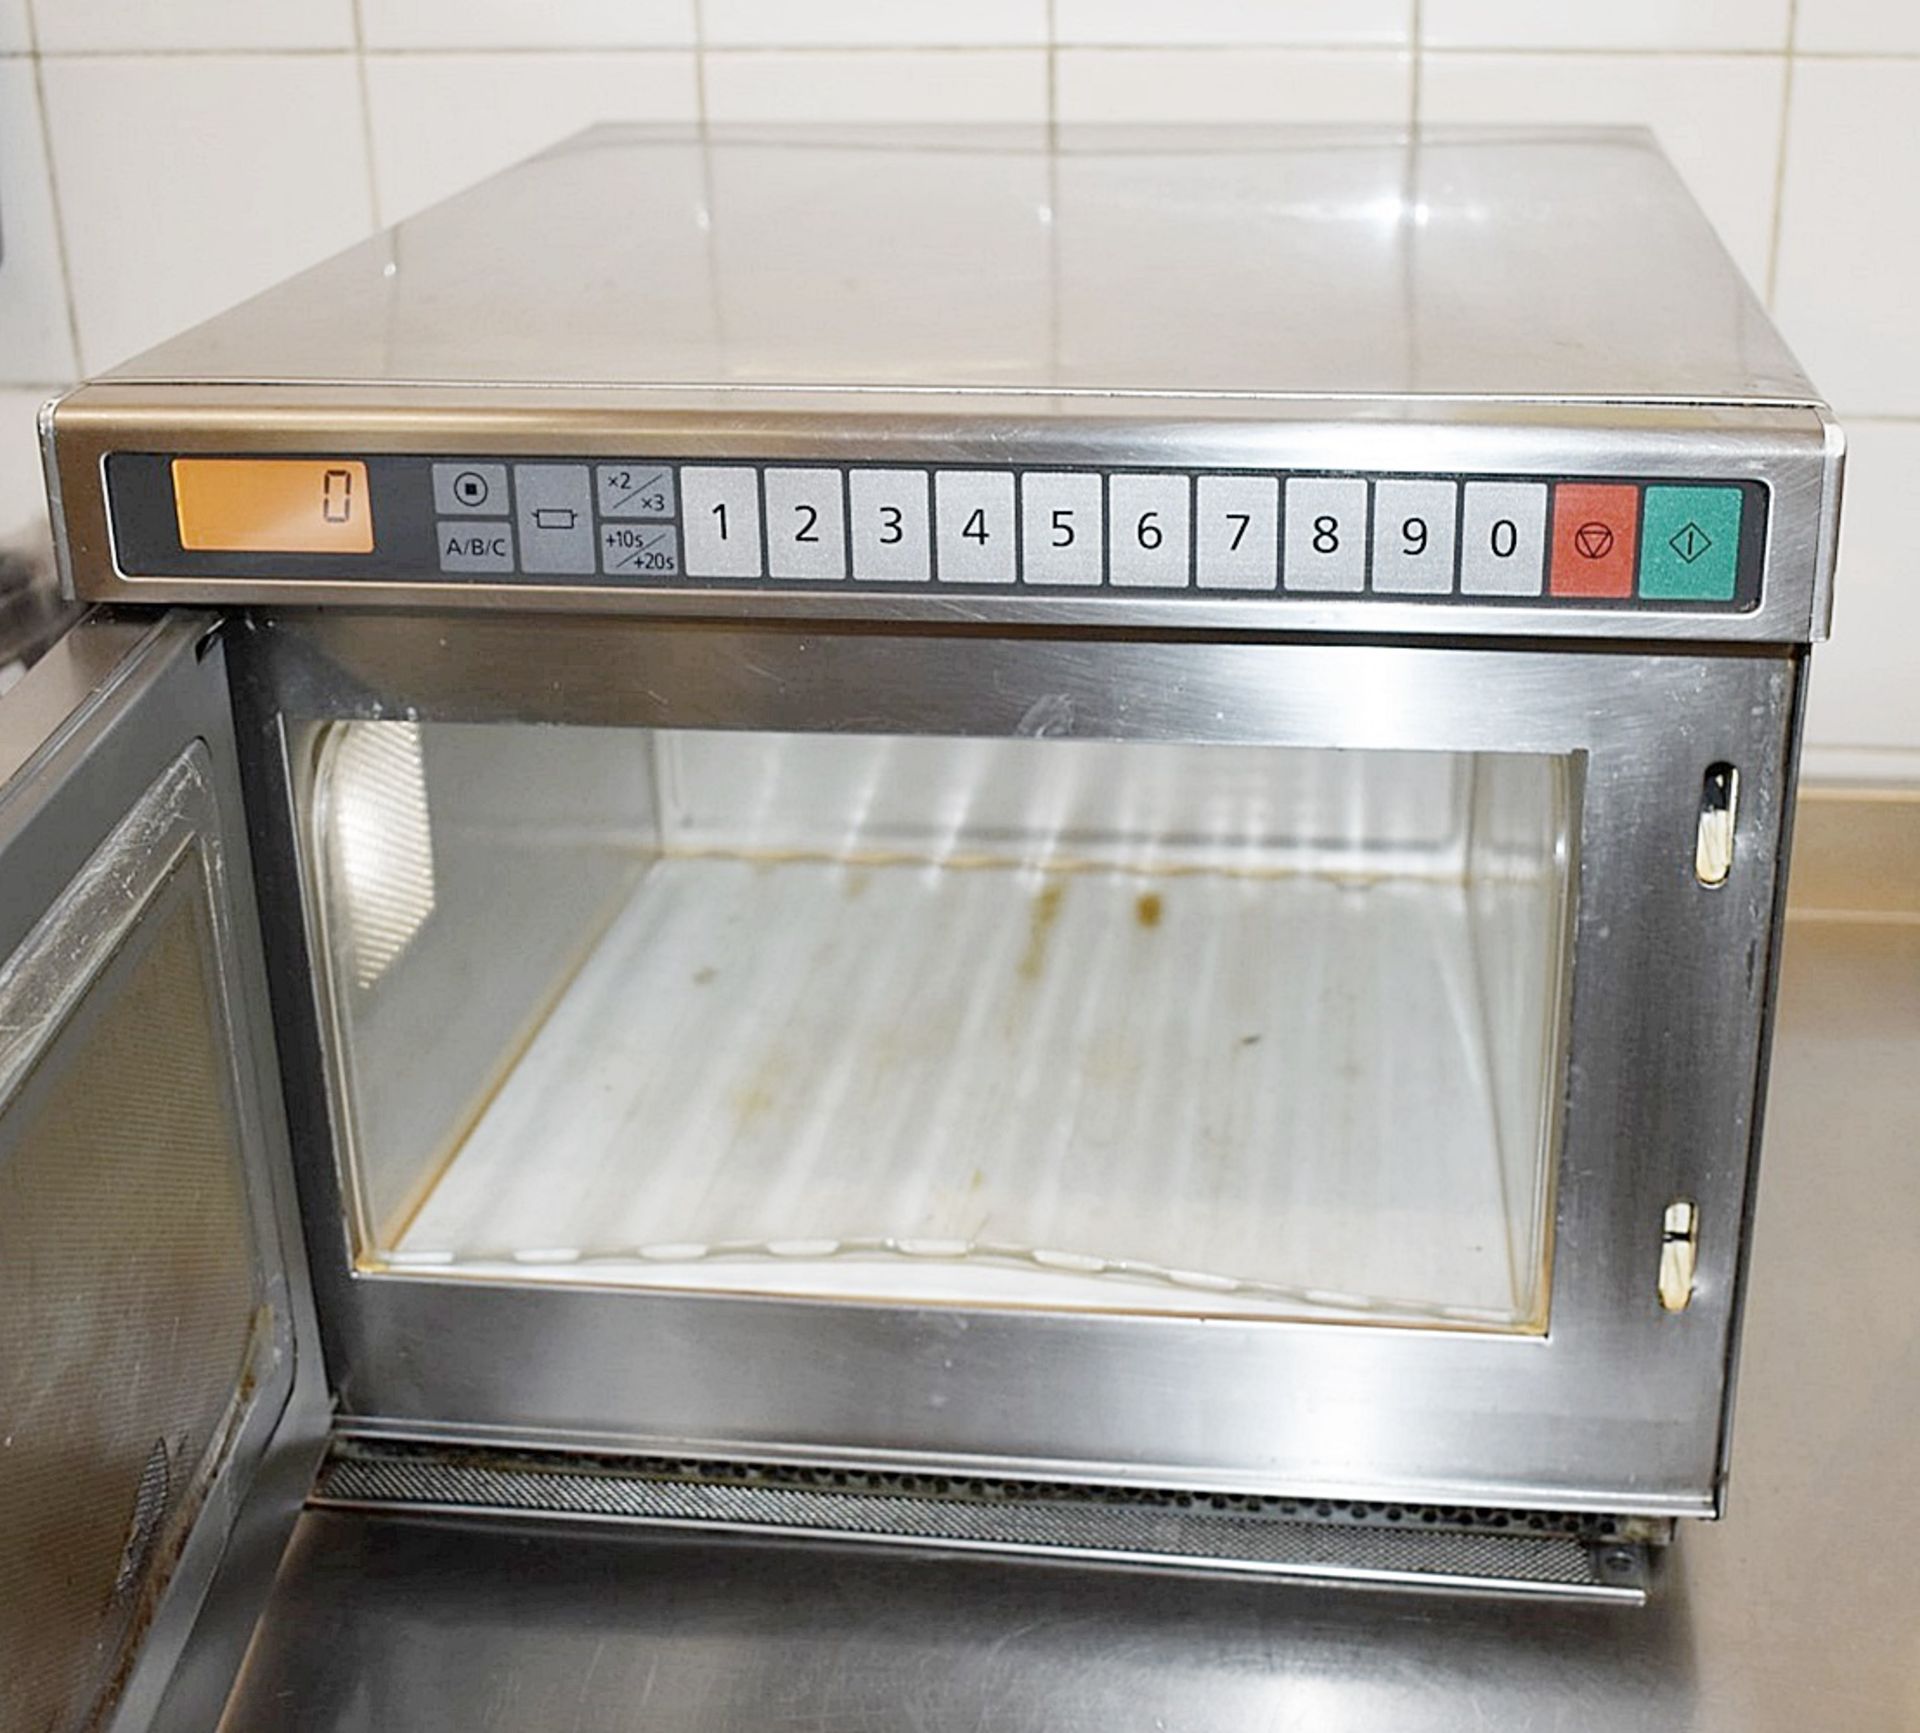 1 x Panasonic NE-1835 Commercial Microwave Oven With Stainless Steel Exterior - 240v - Ref C509 - CL - Image 3 of 4